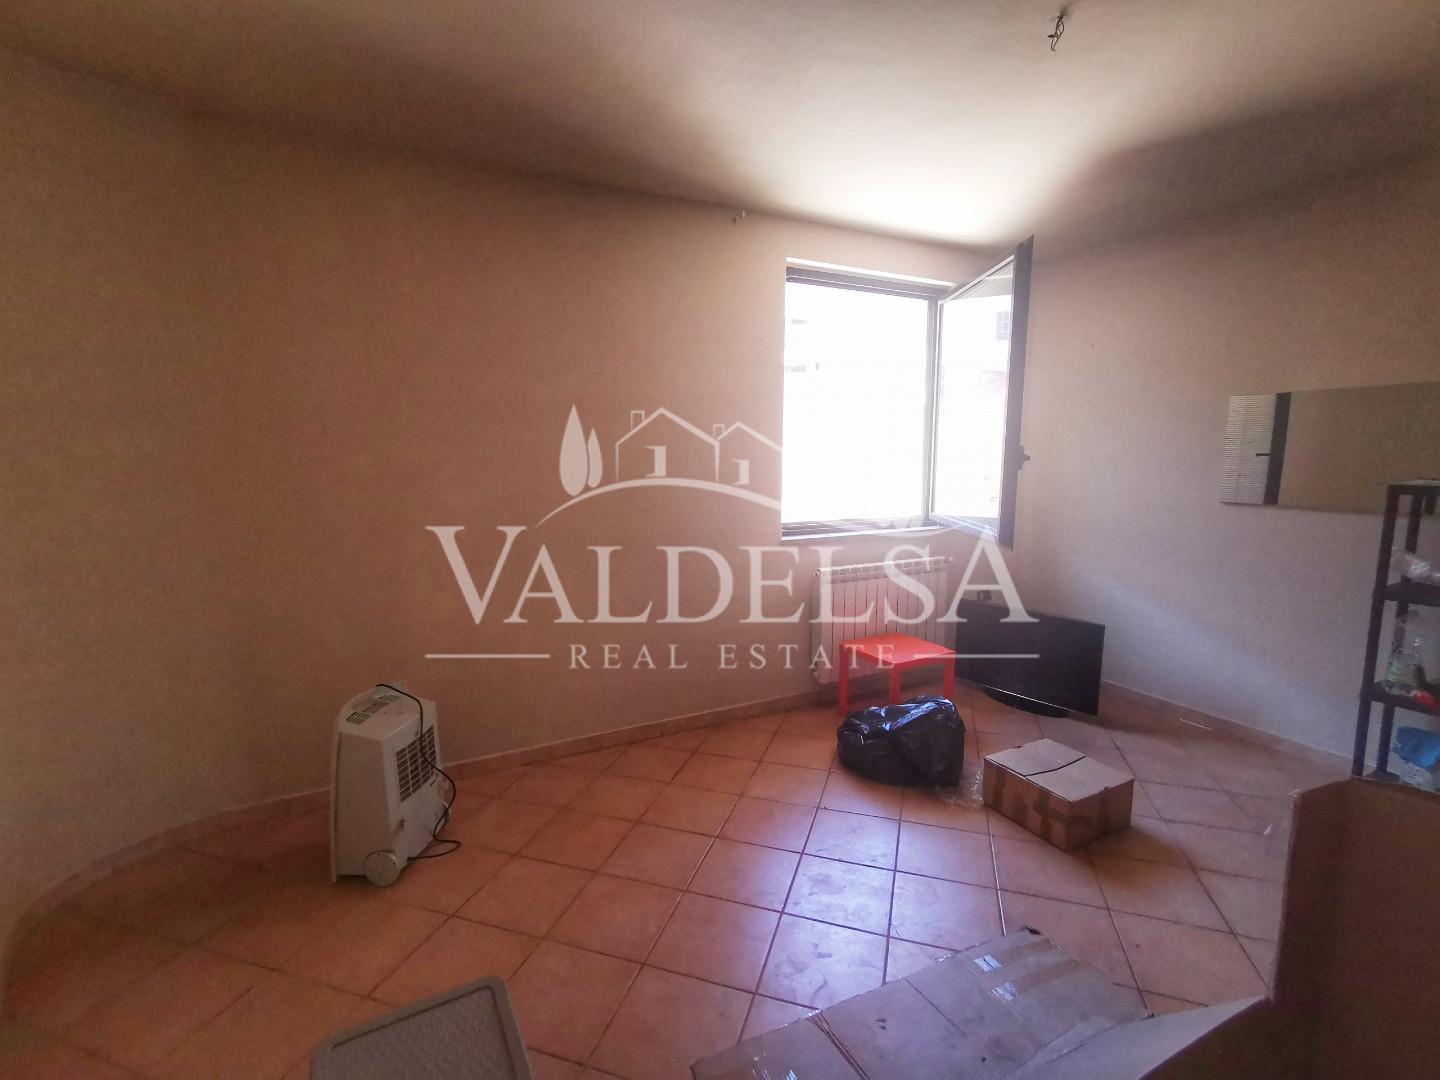 Apartment for sale, ref. 712